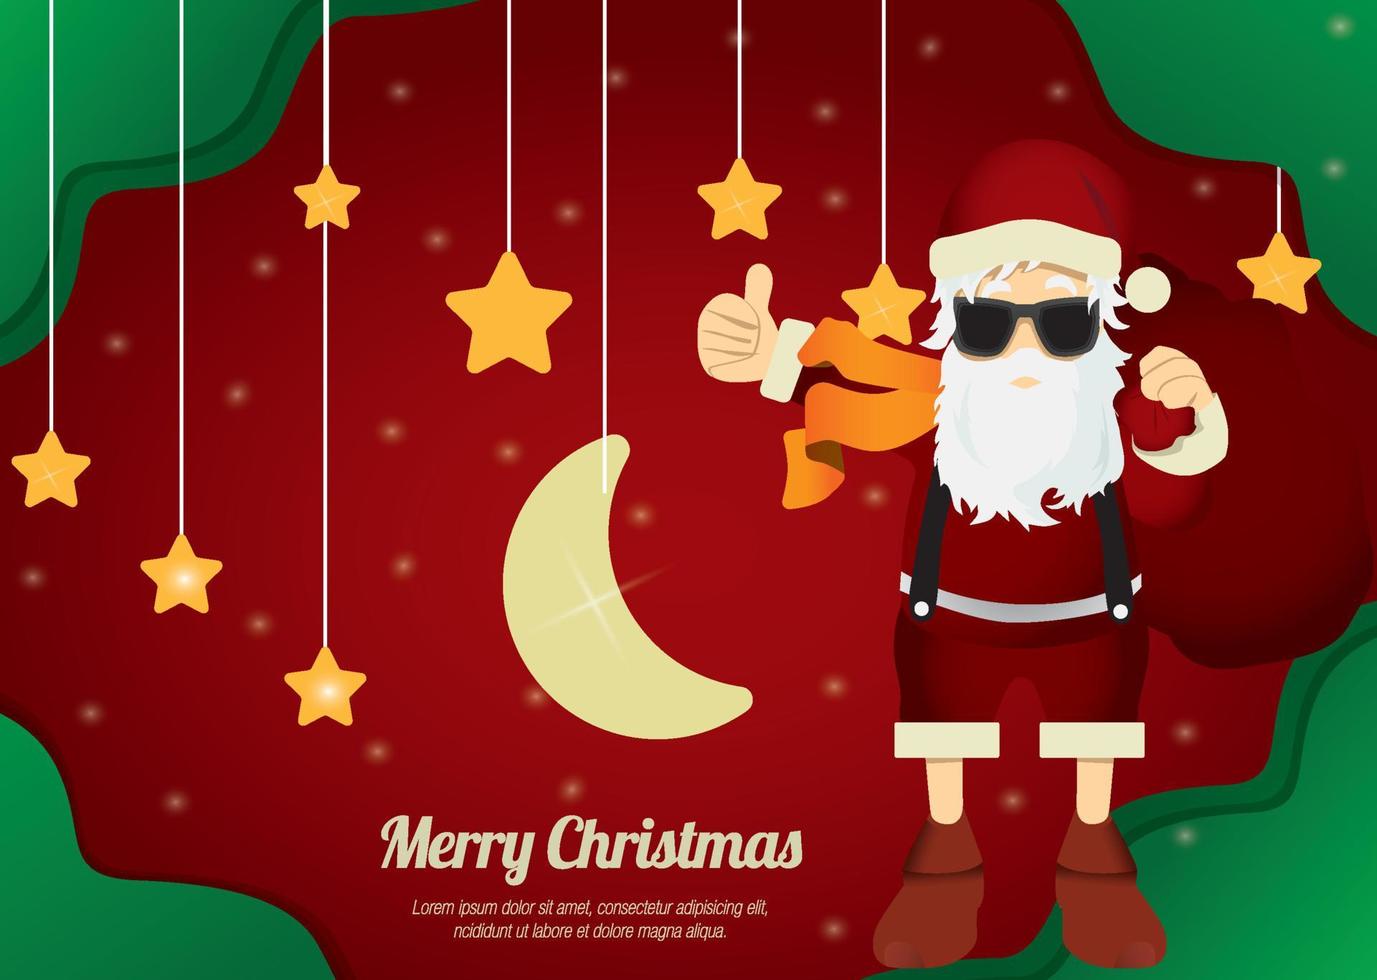 Merry Christmas Santa Claus like thumbs up with hanging a star and moon vector